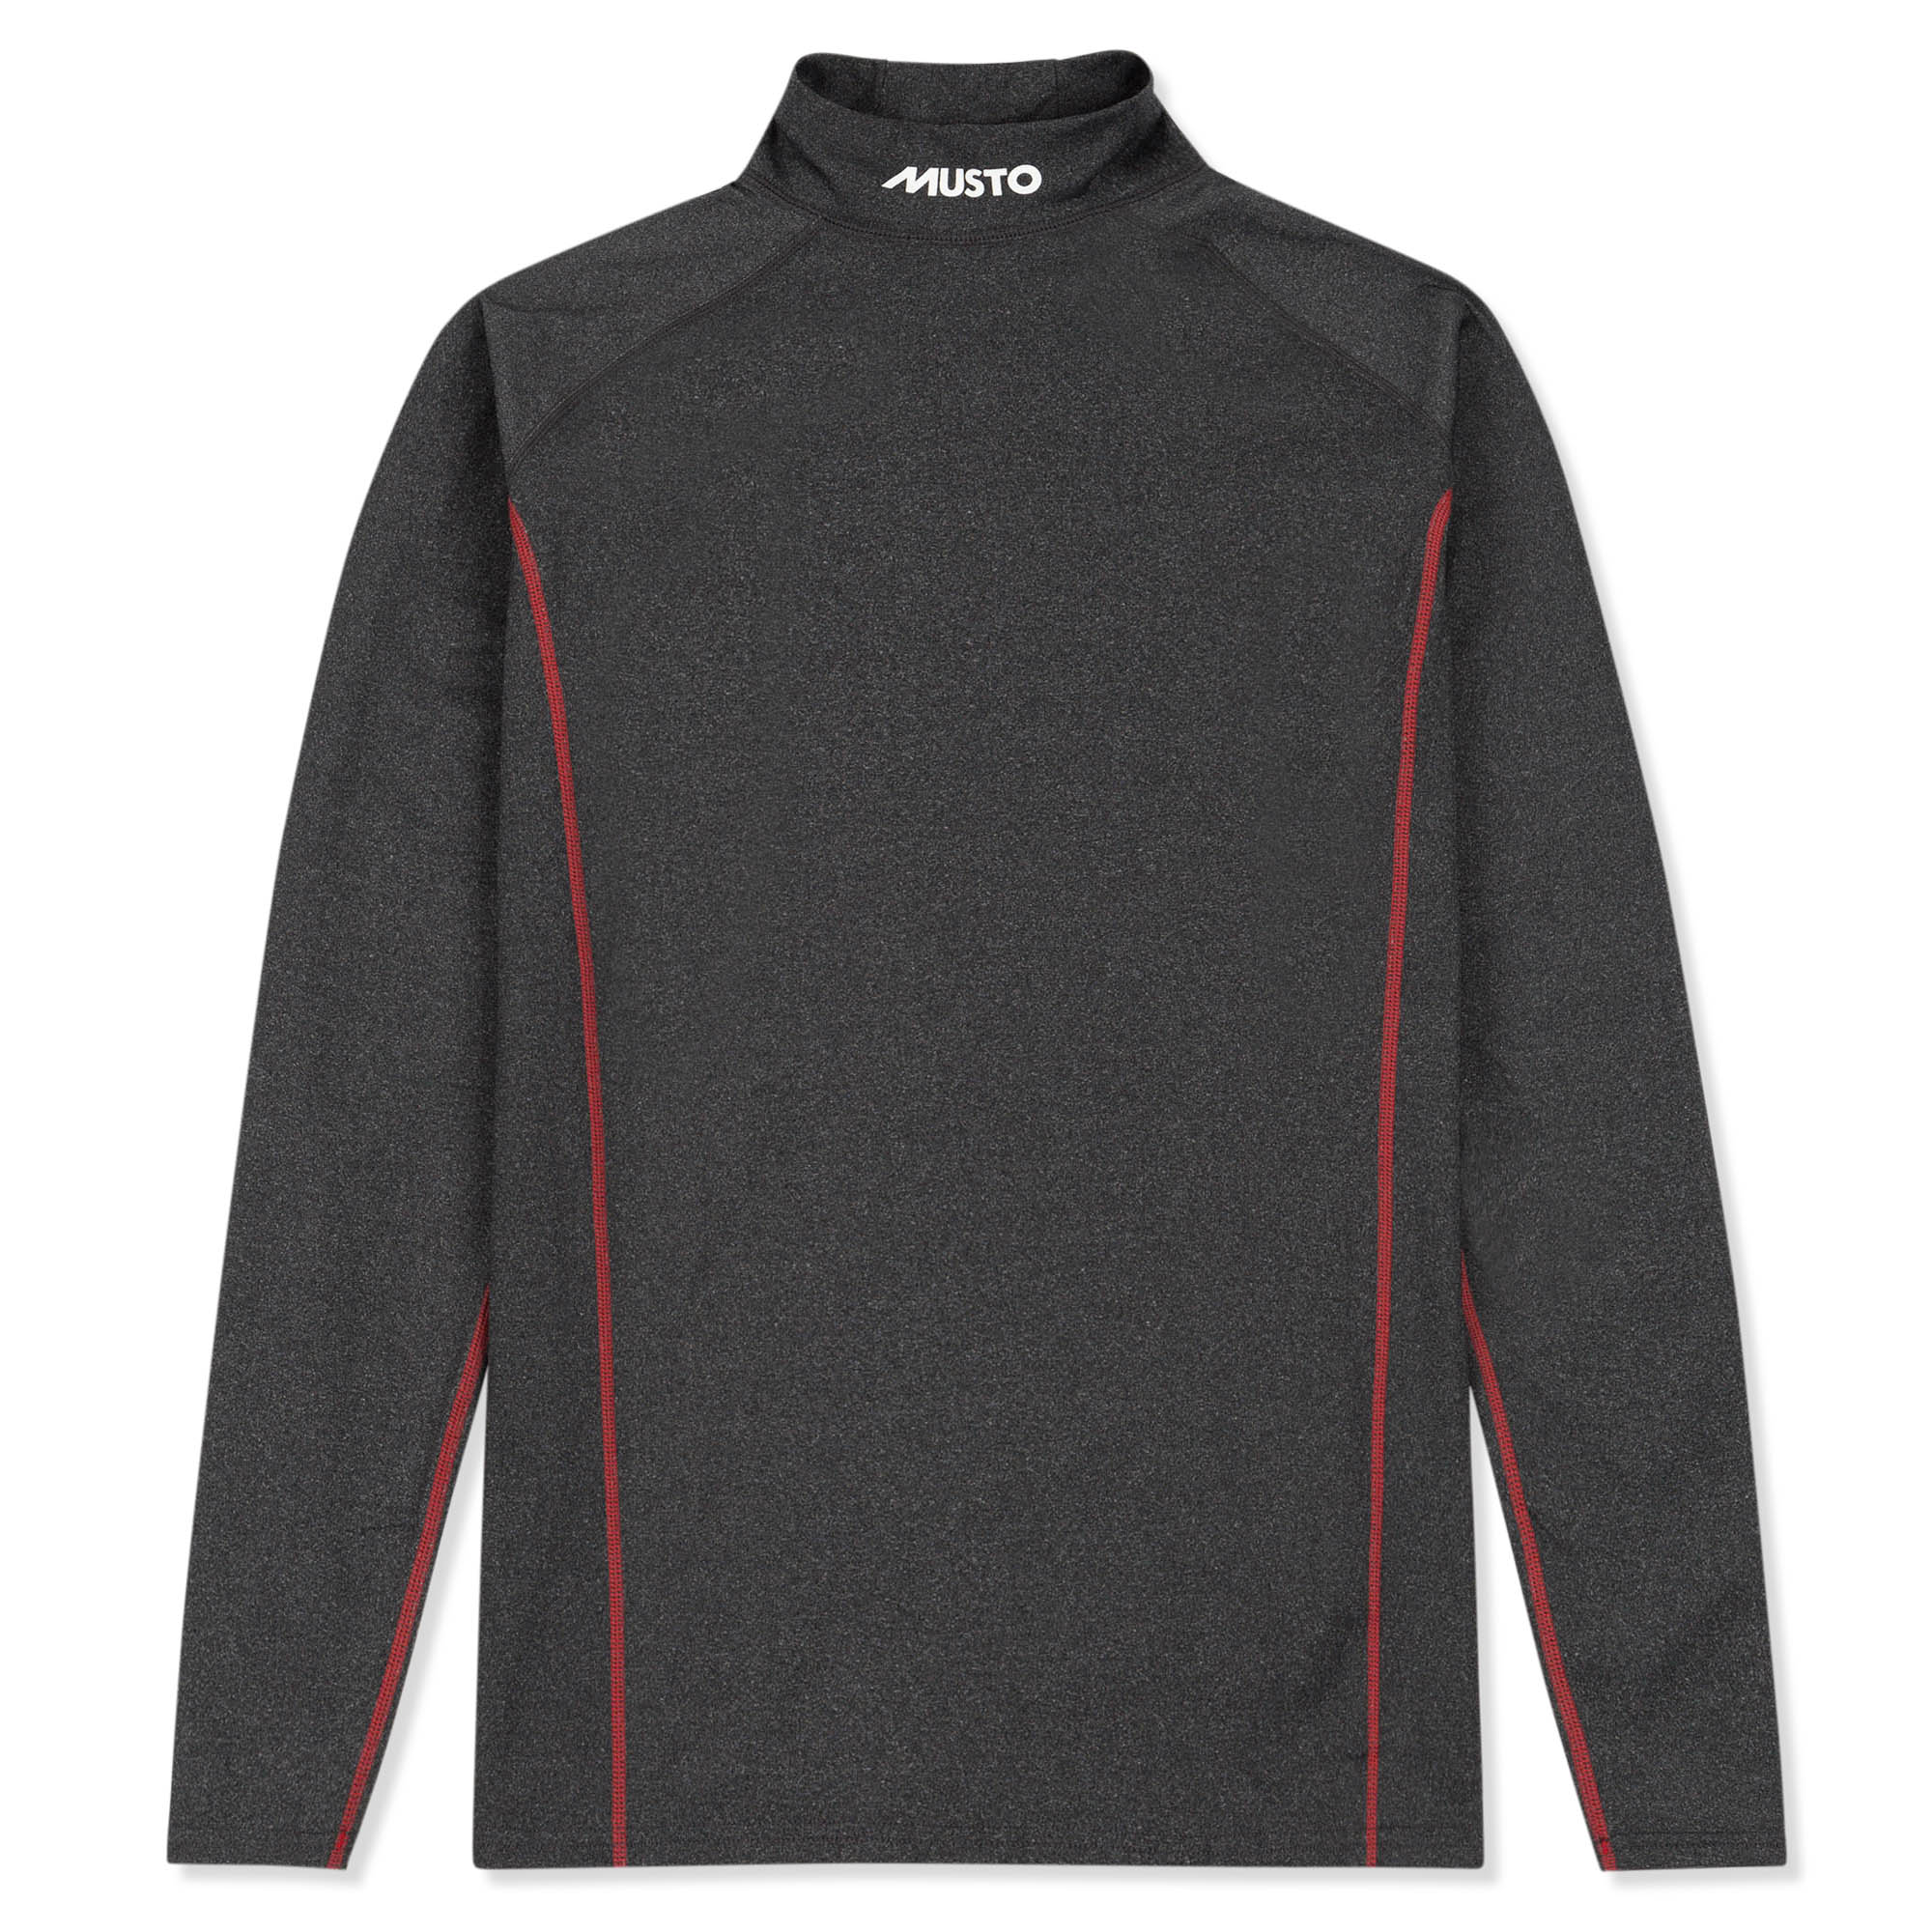 MUSTO - Thermal Base Layer Top